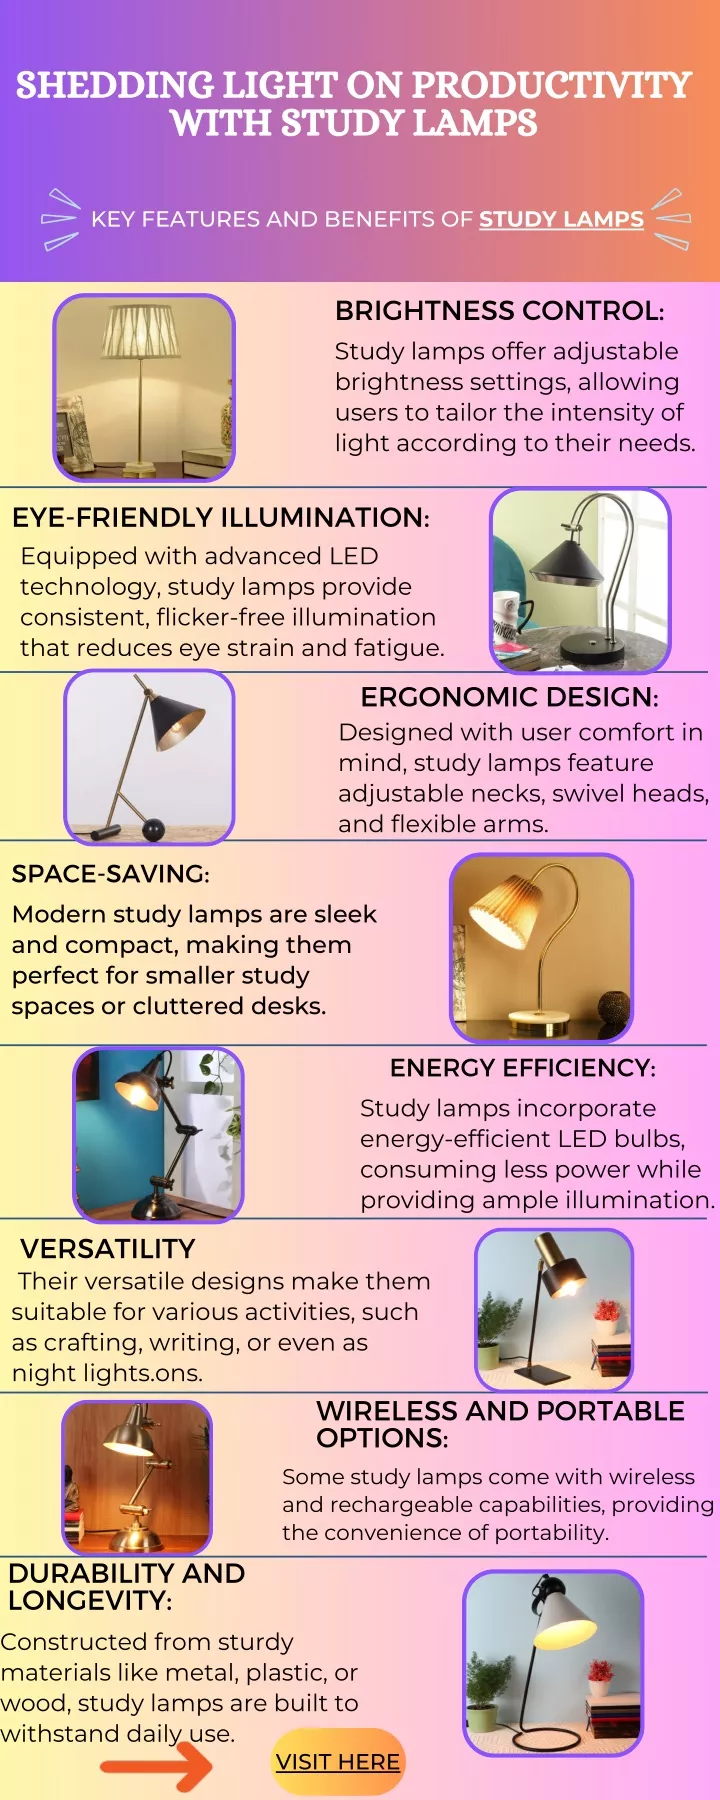 shedding light on productivity with study lamps